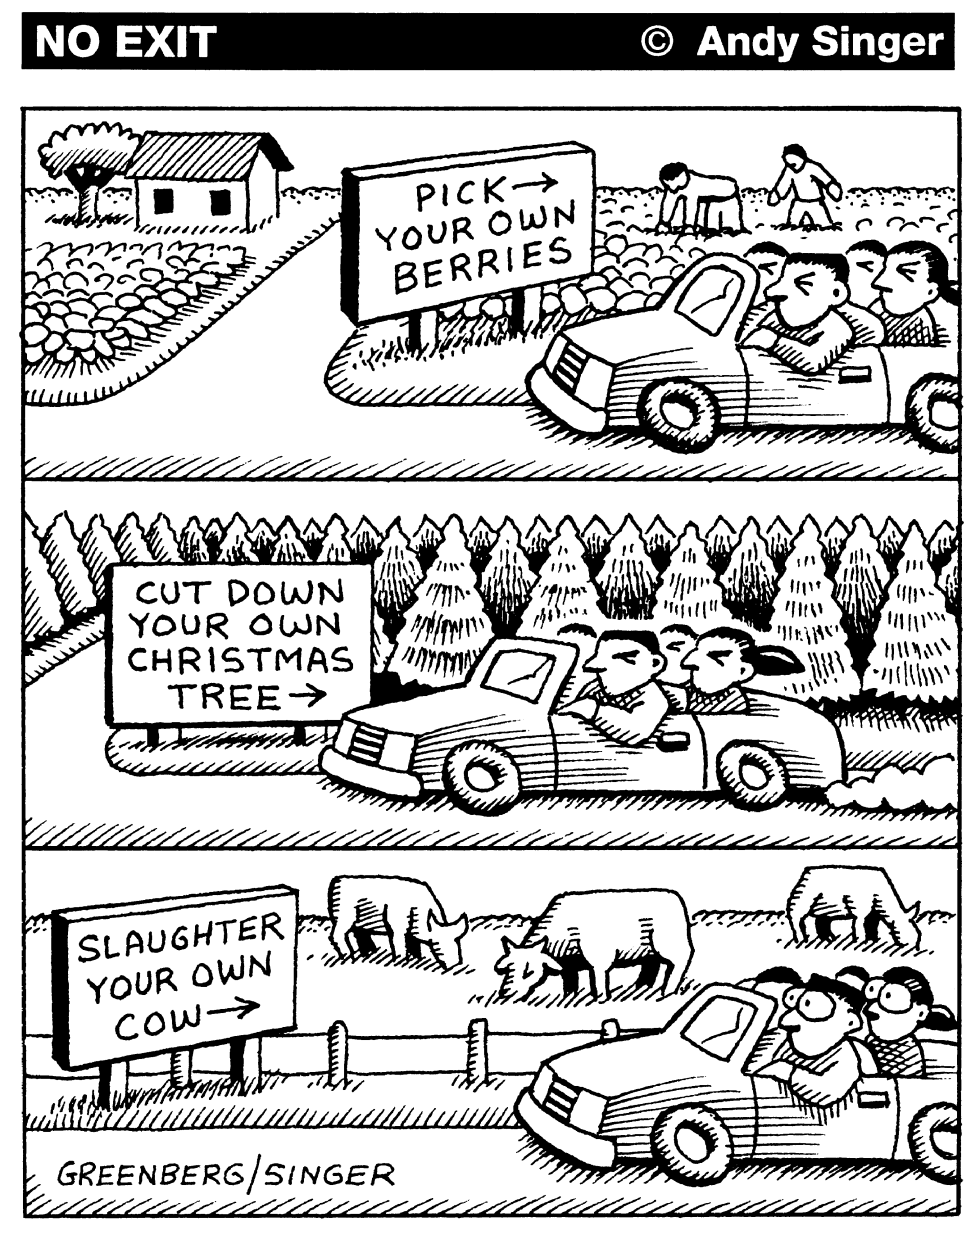 KILL YOUR OWN COW by Andy Singer